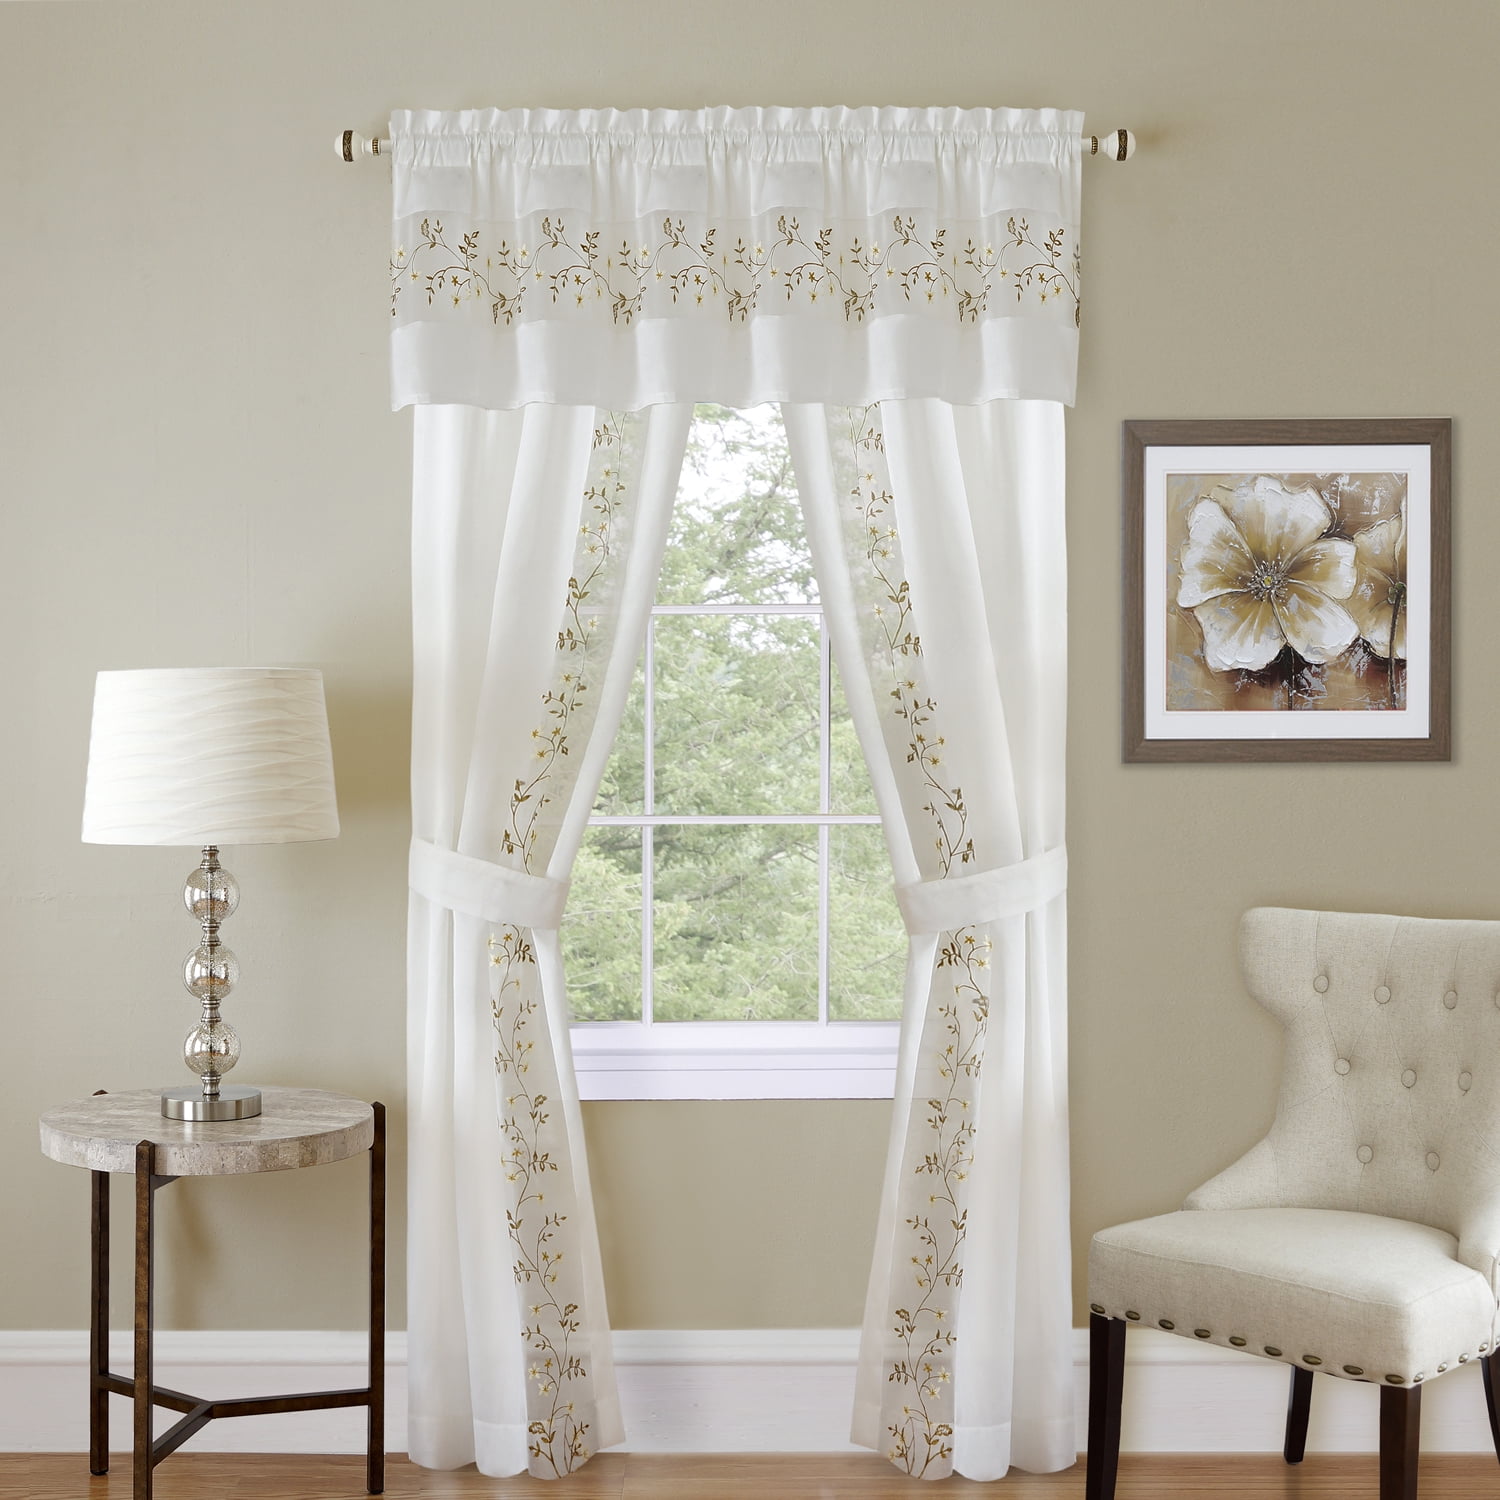 White Baby Doll Candyland 5 Piece Window Valance and Curtain Set